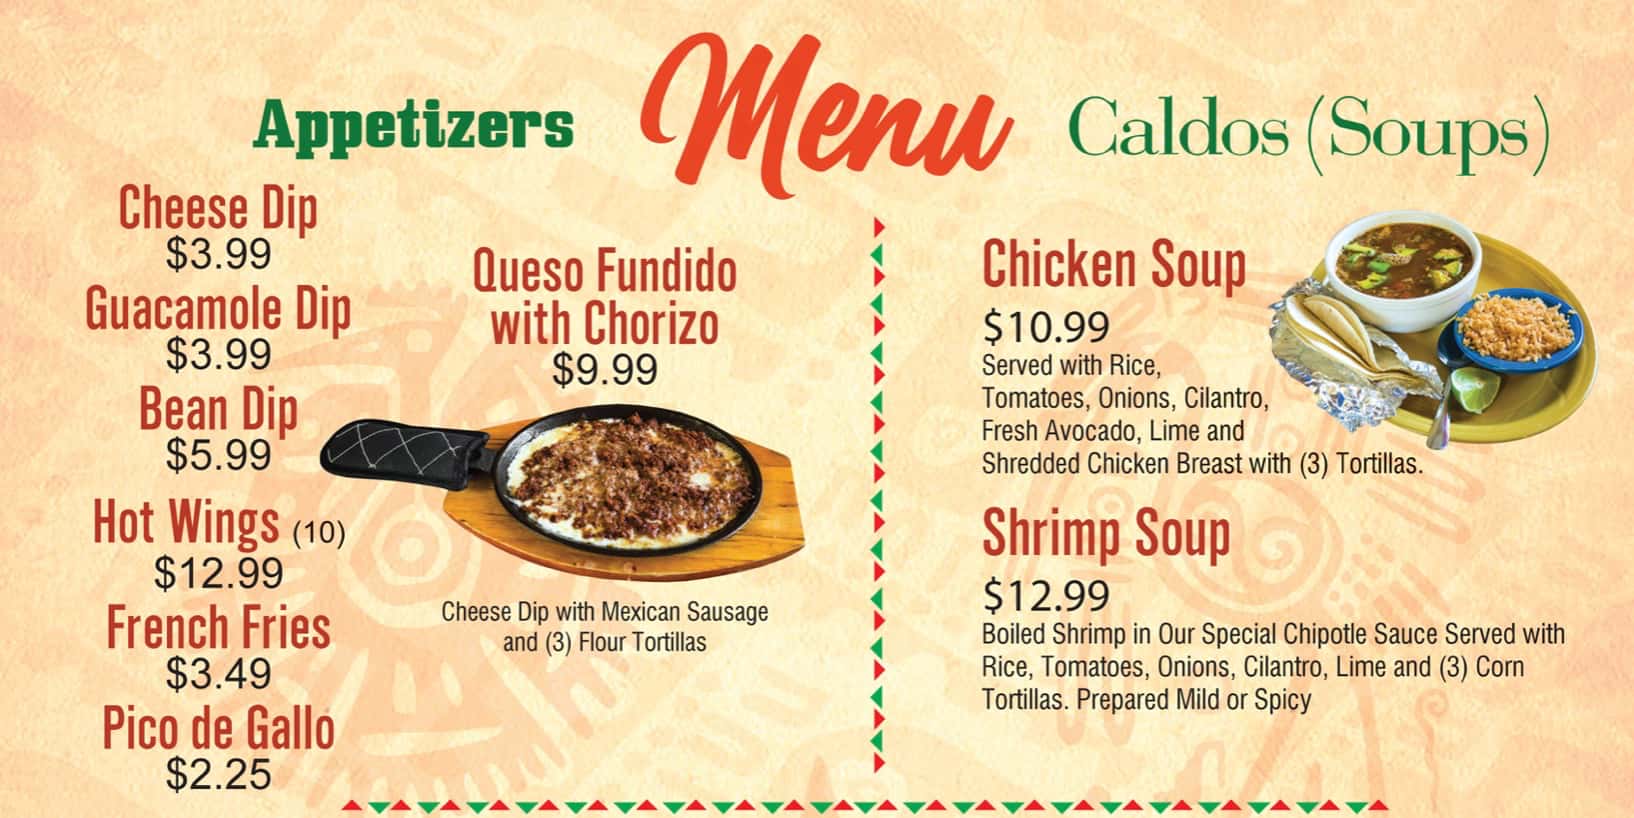 Casa Leon Mexican Restaurant Menu With Prices